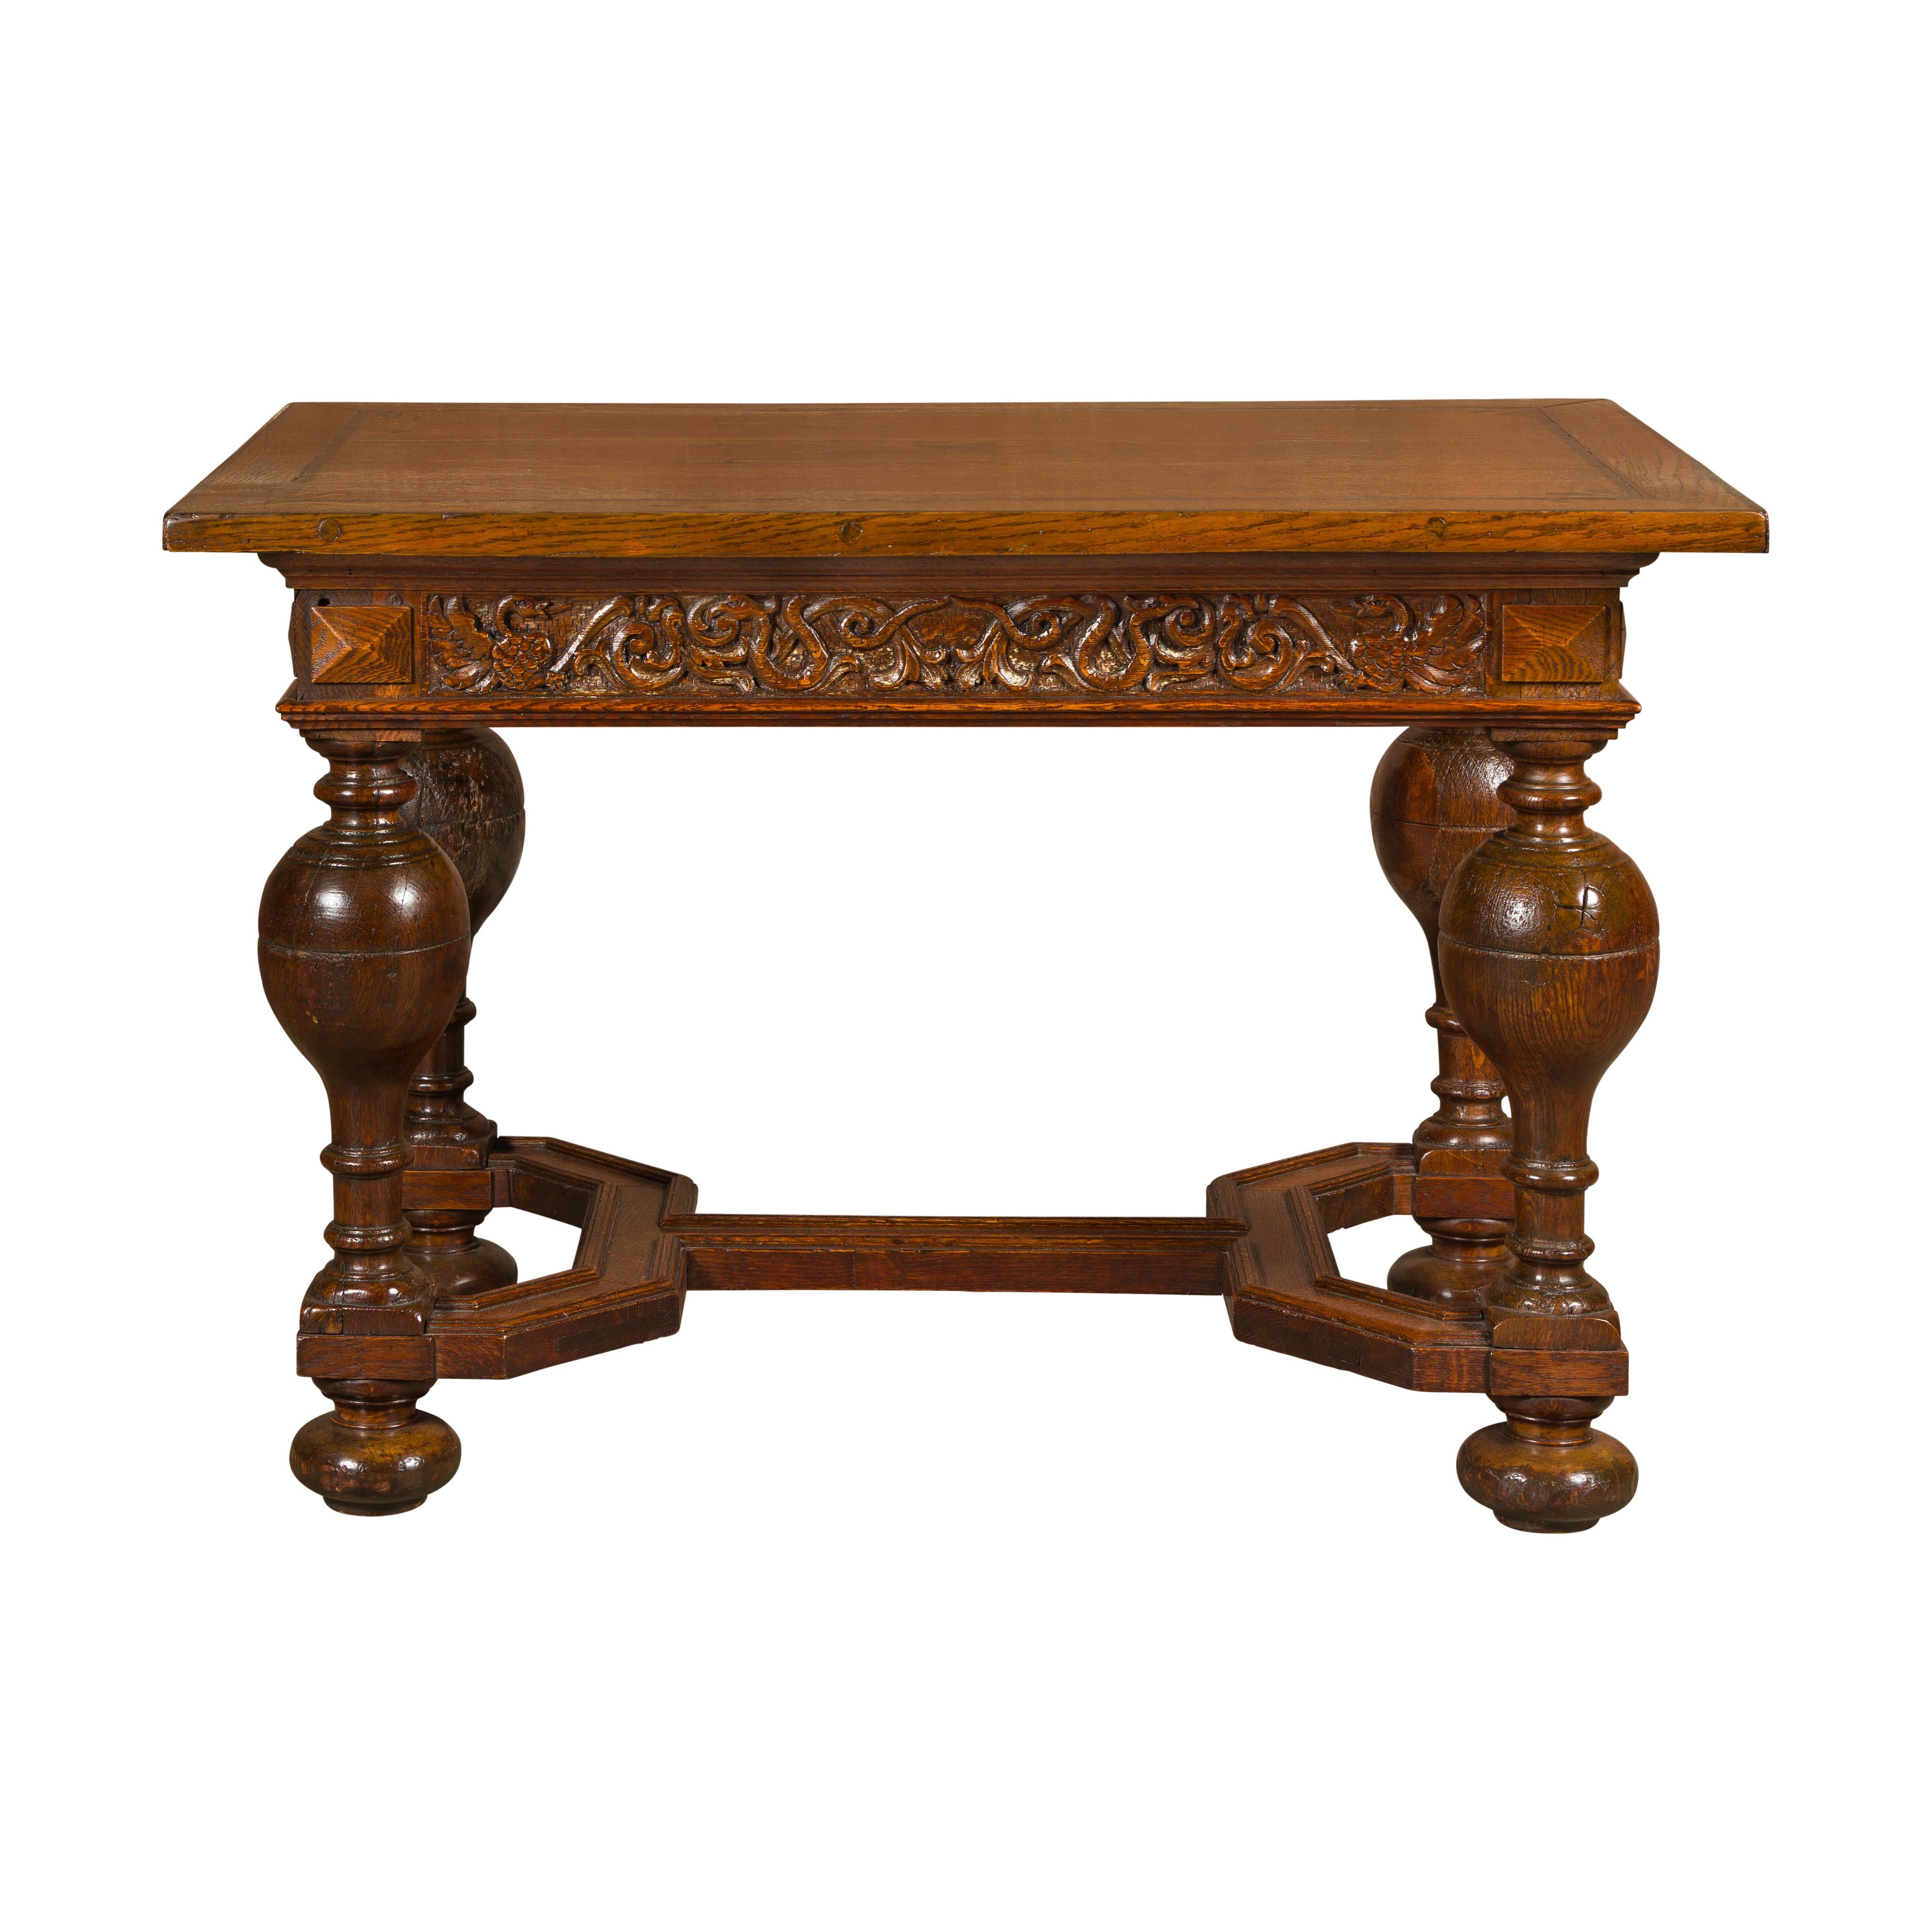 English 19th Century Oak Table with Carved Apron and Turned Baluster Legs For Sale 17